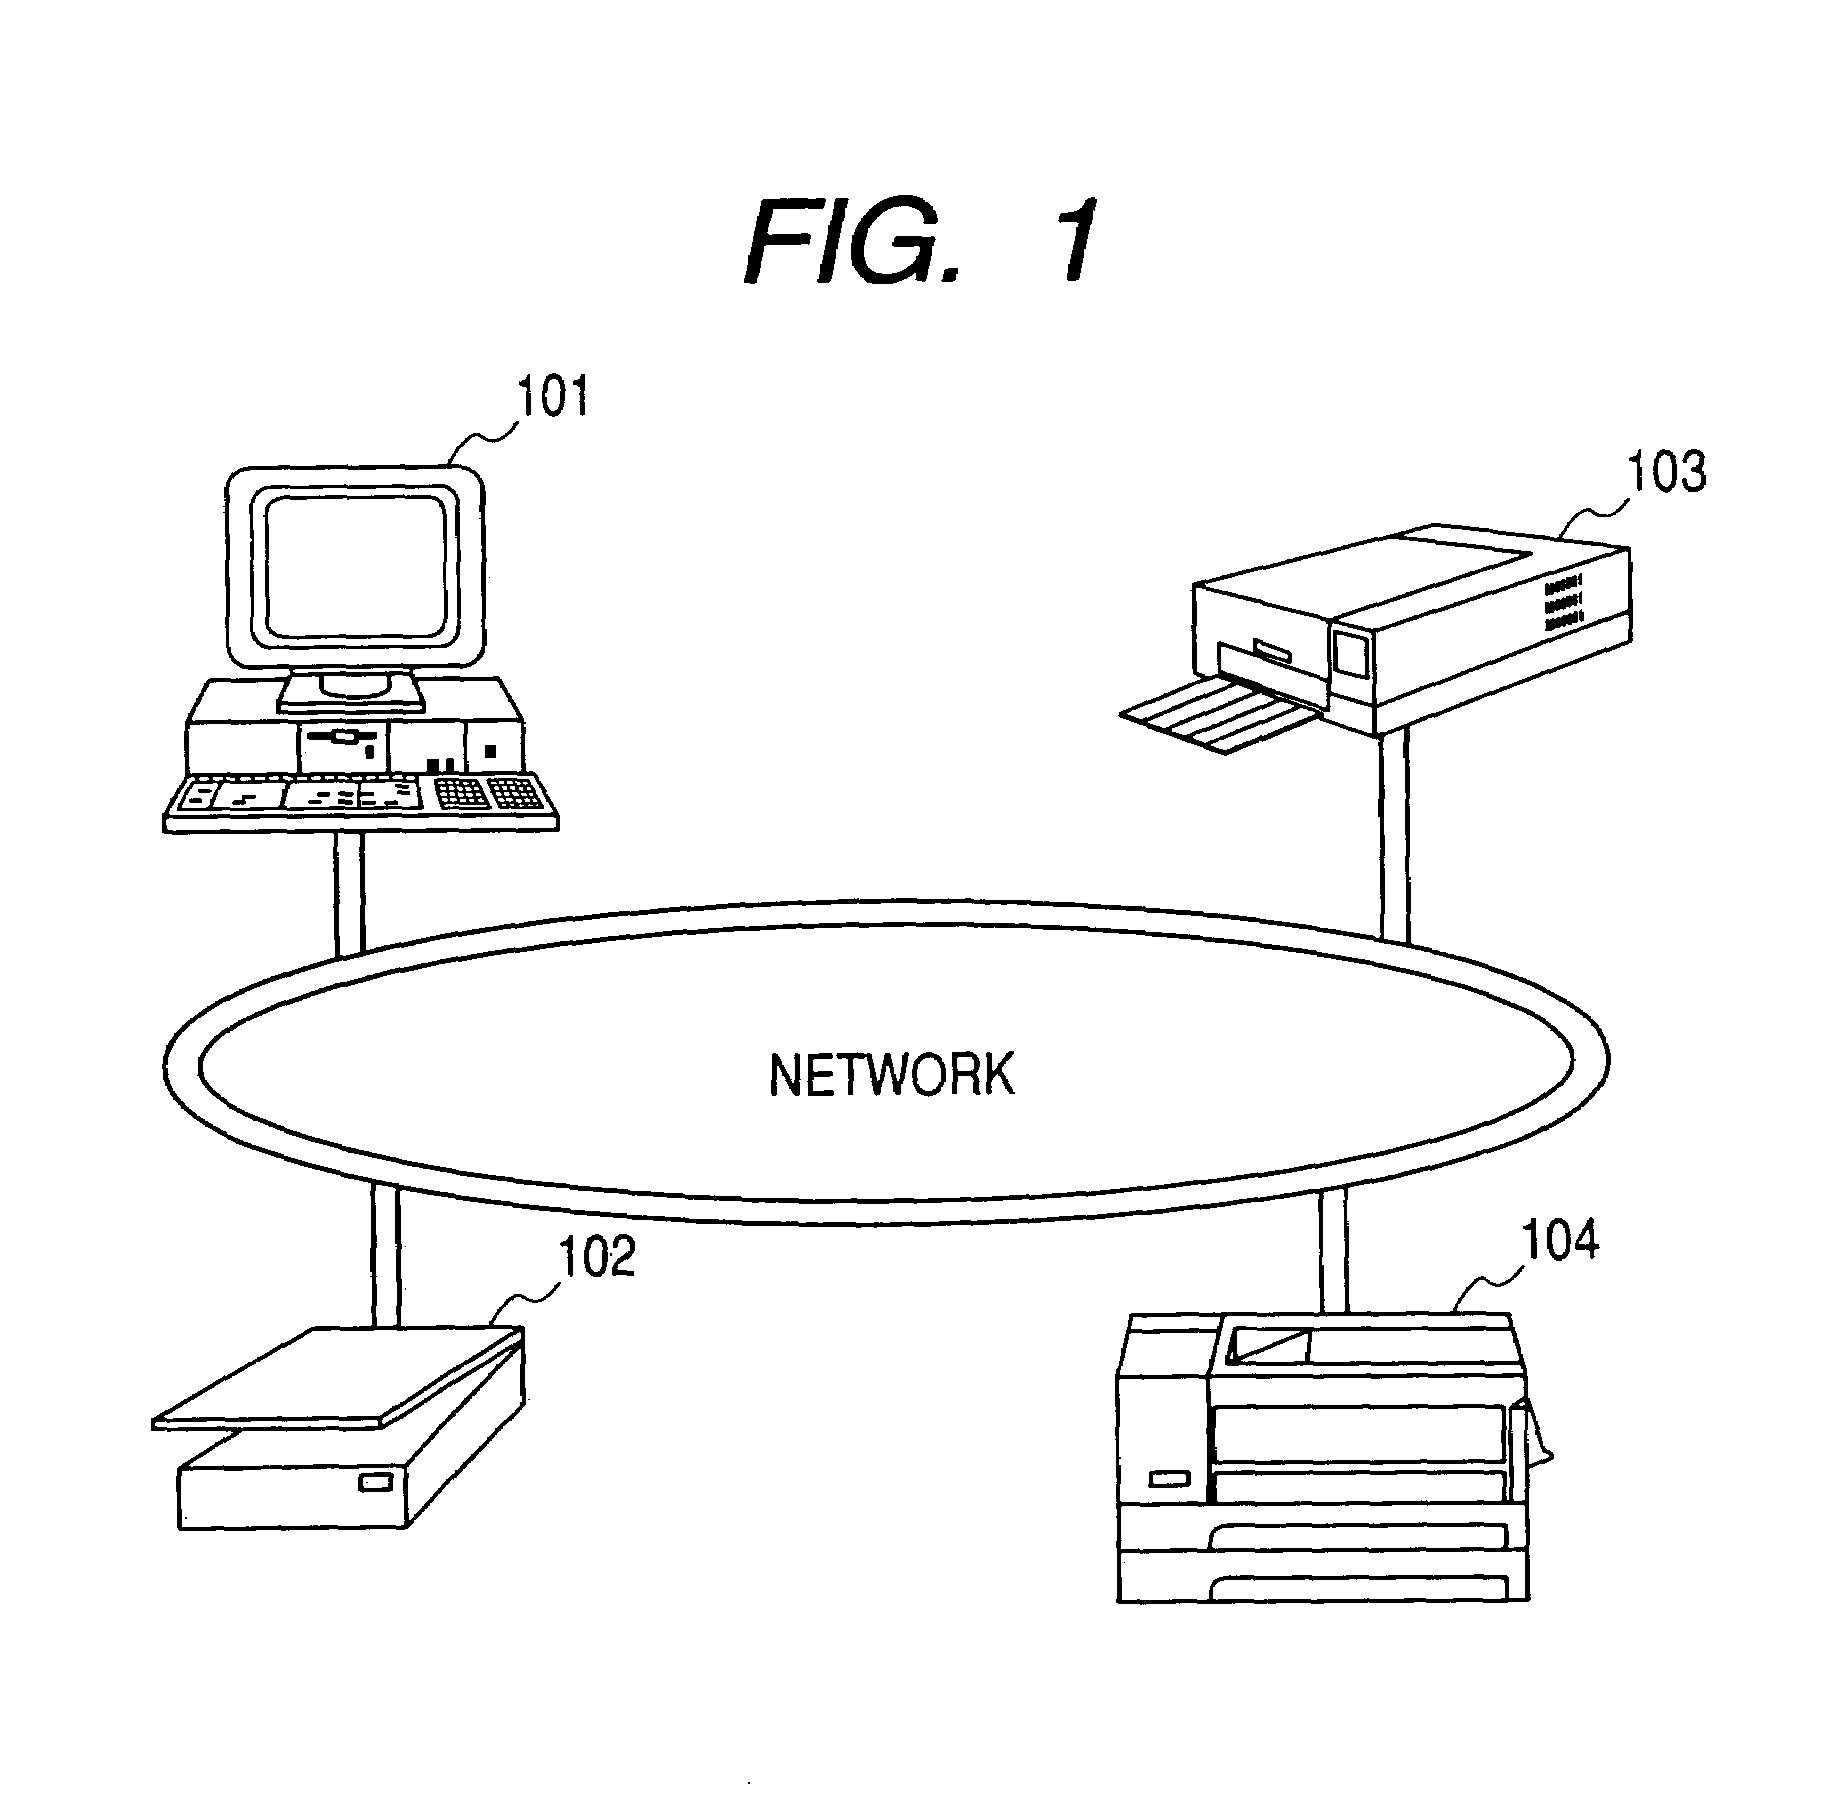 Remote control apparatus and system in which identification or control information is obtained from a device to be controlled